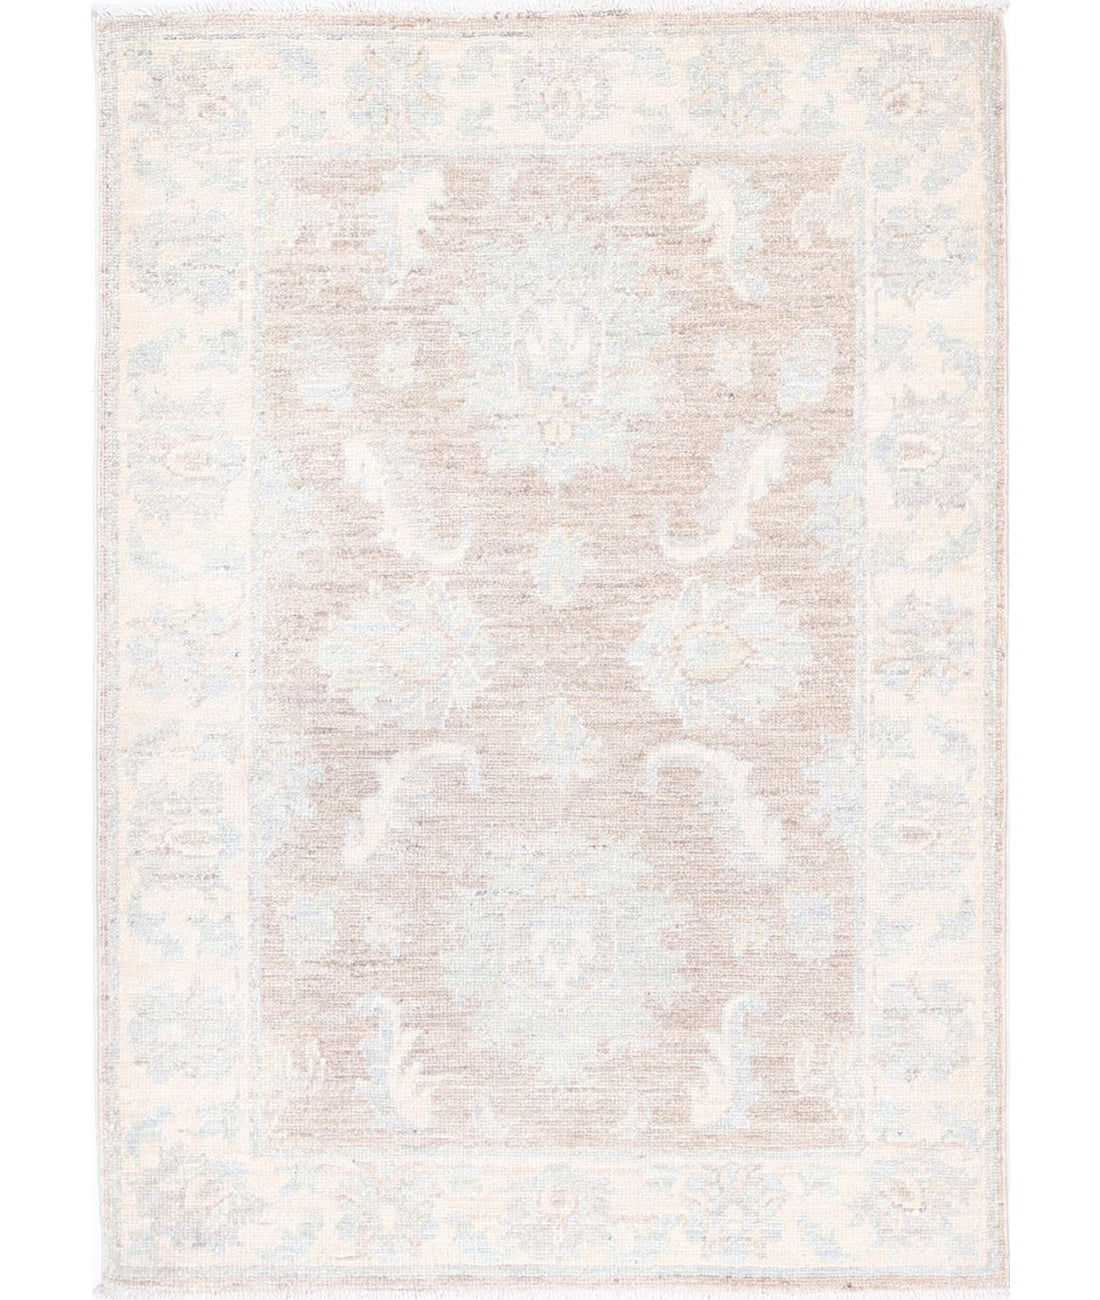 Hand Knotted Serenity Wool Rug - 2'3'' x 3'3'' 2'3'' x 3'3'' (68 X 98) / Brown / Ivory